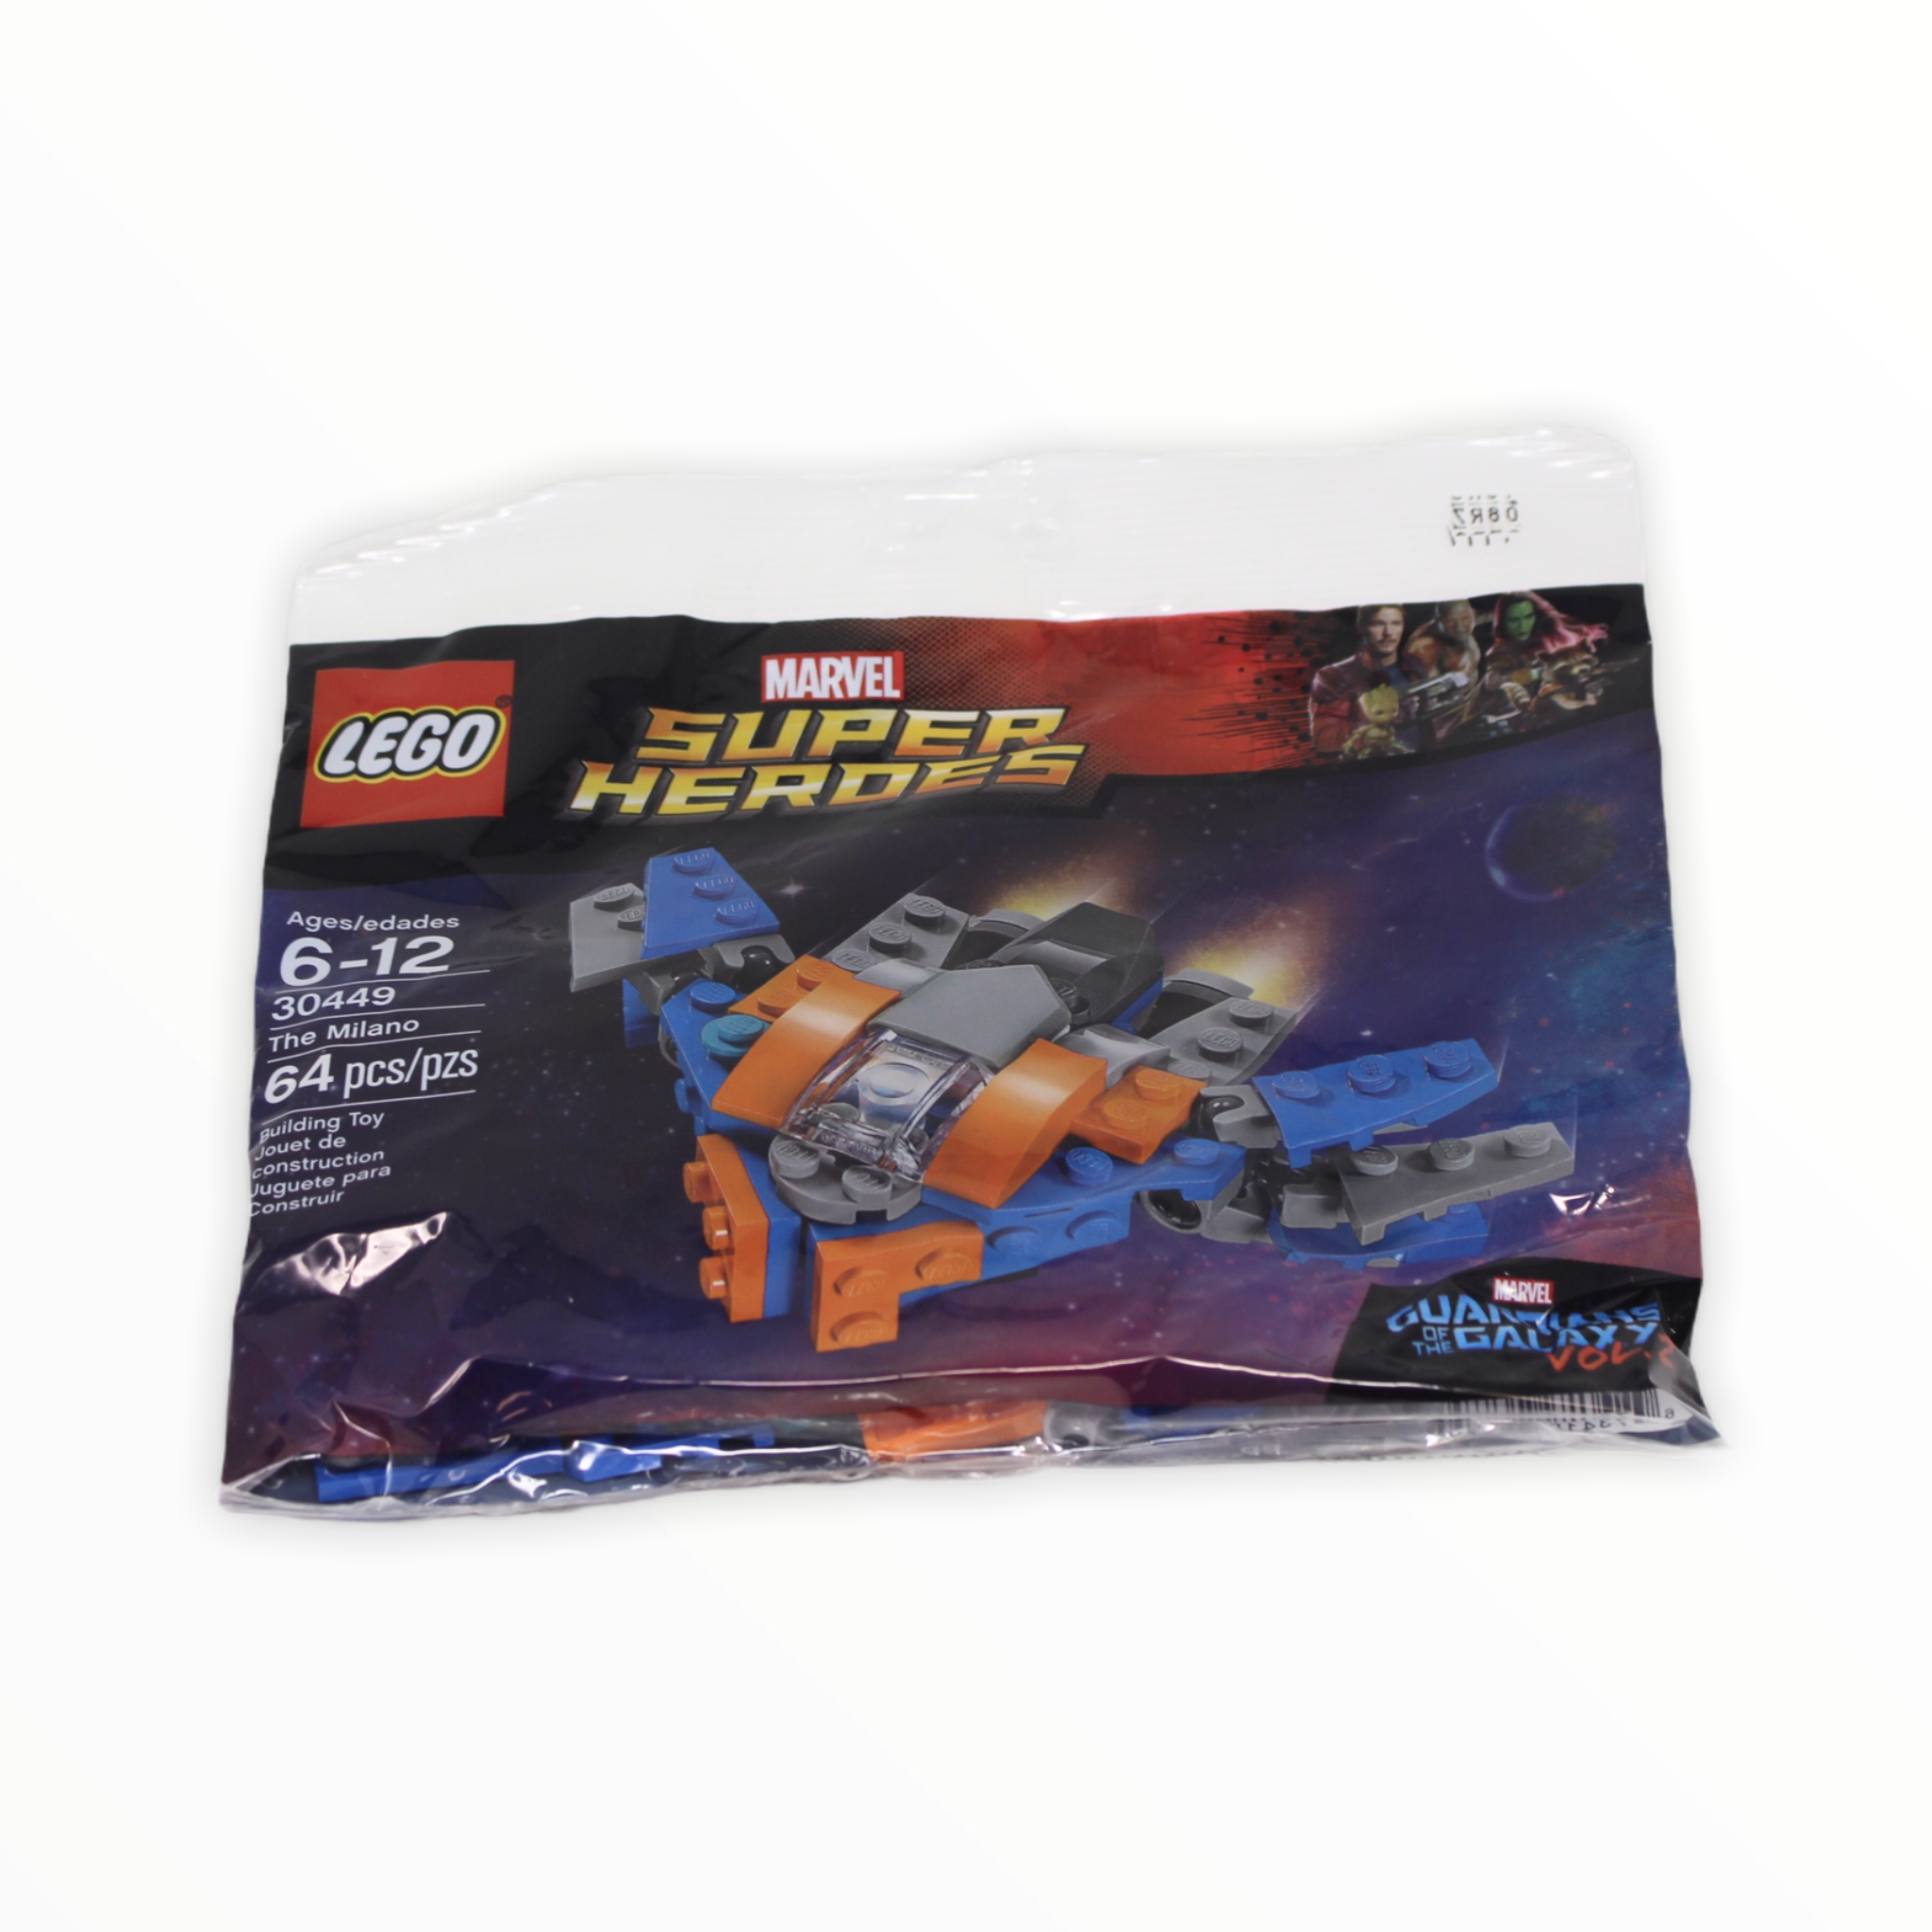 Polybag 30449 Marvel Super Heroes The Milano